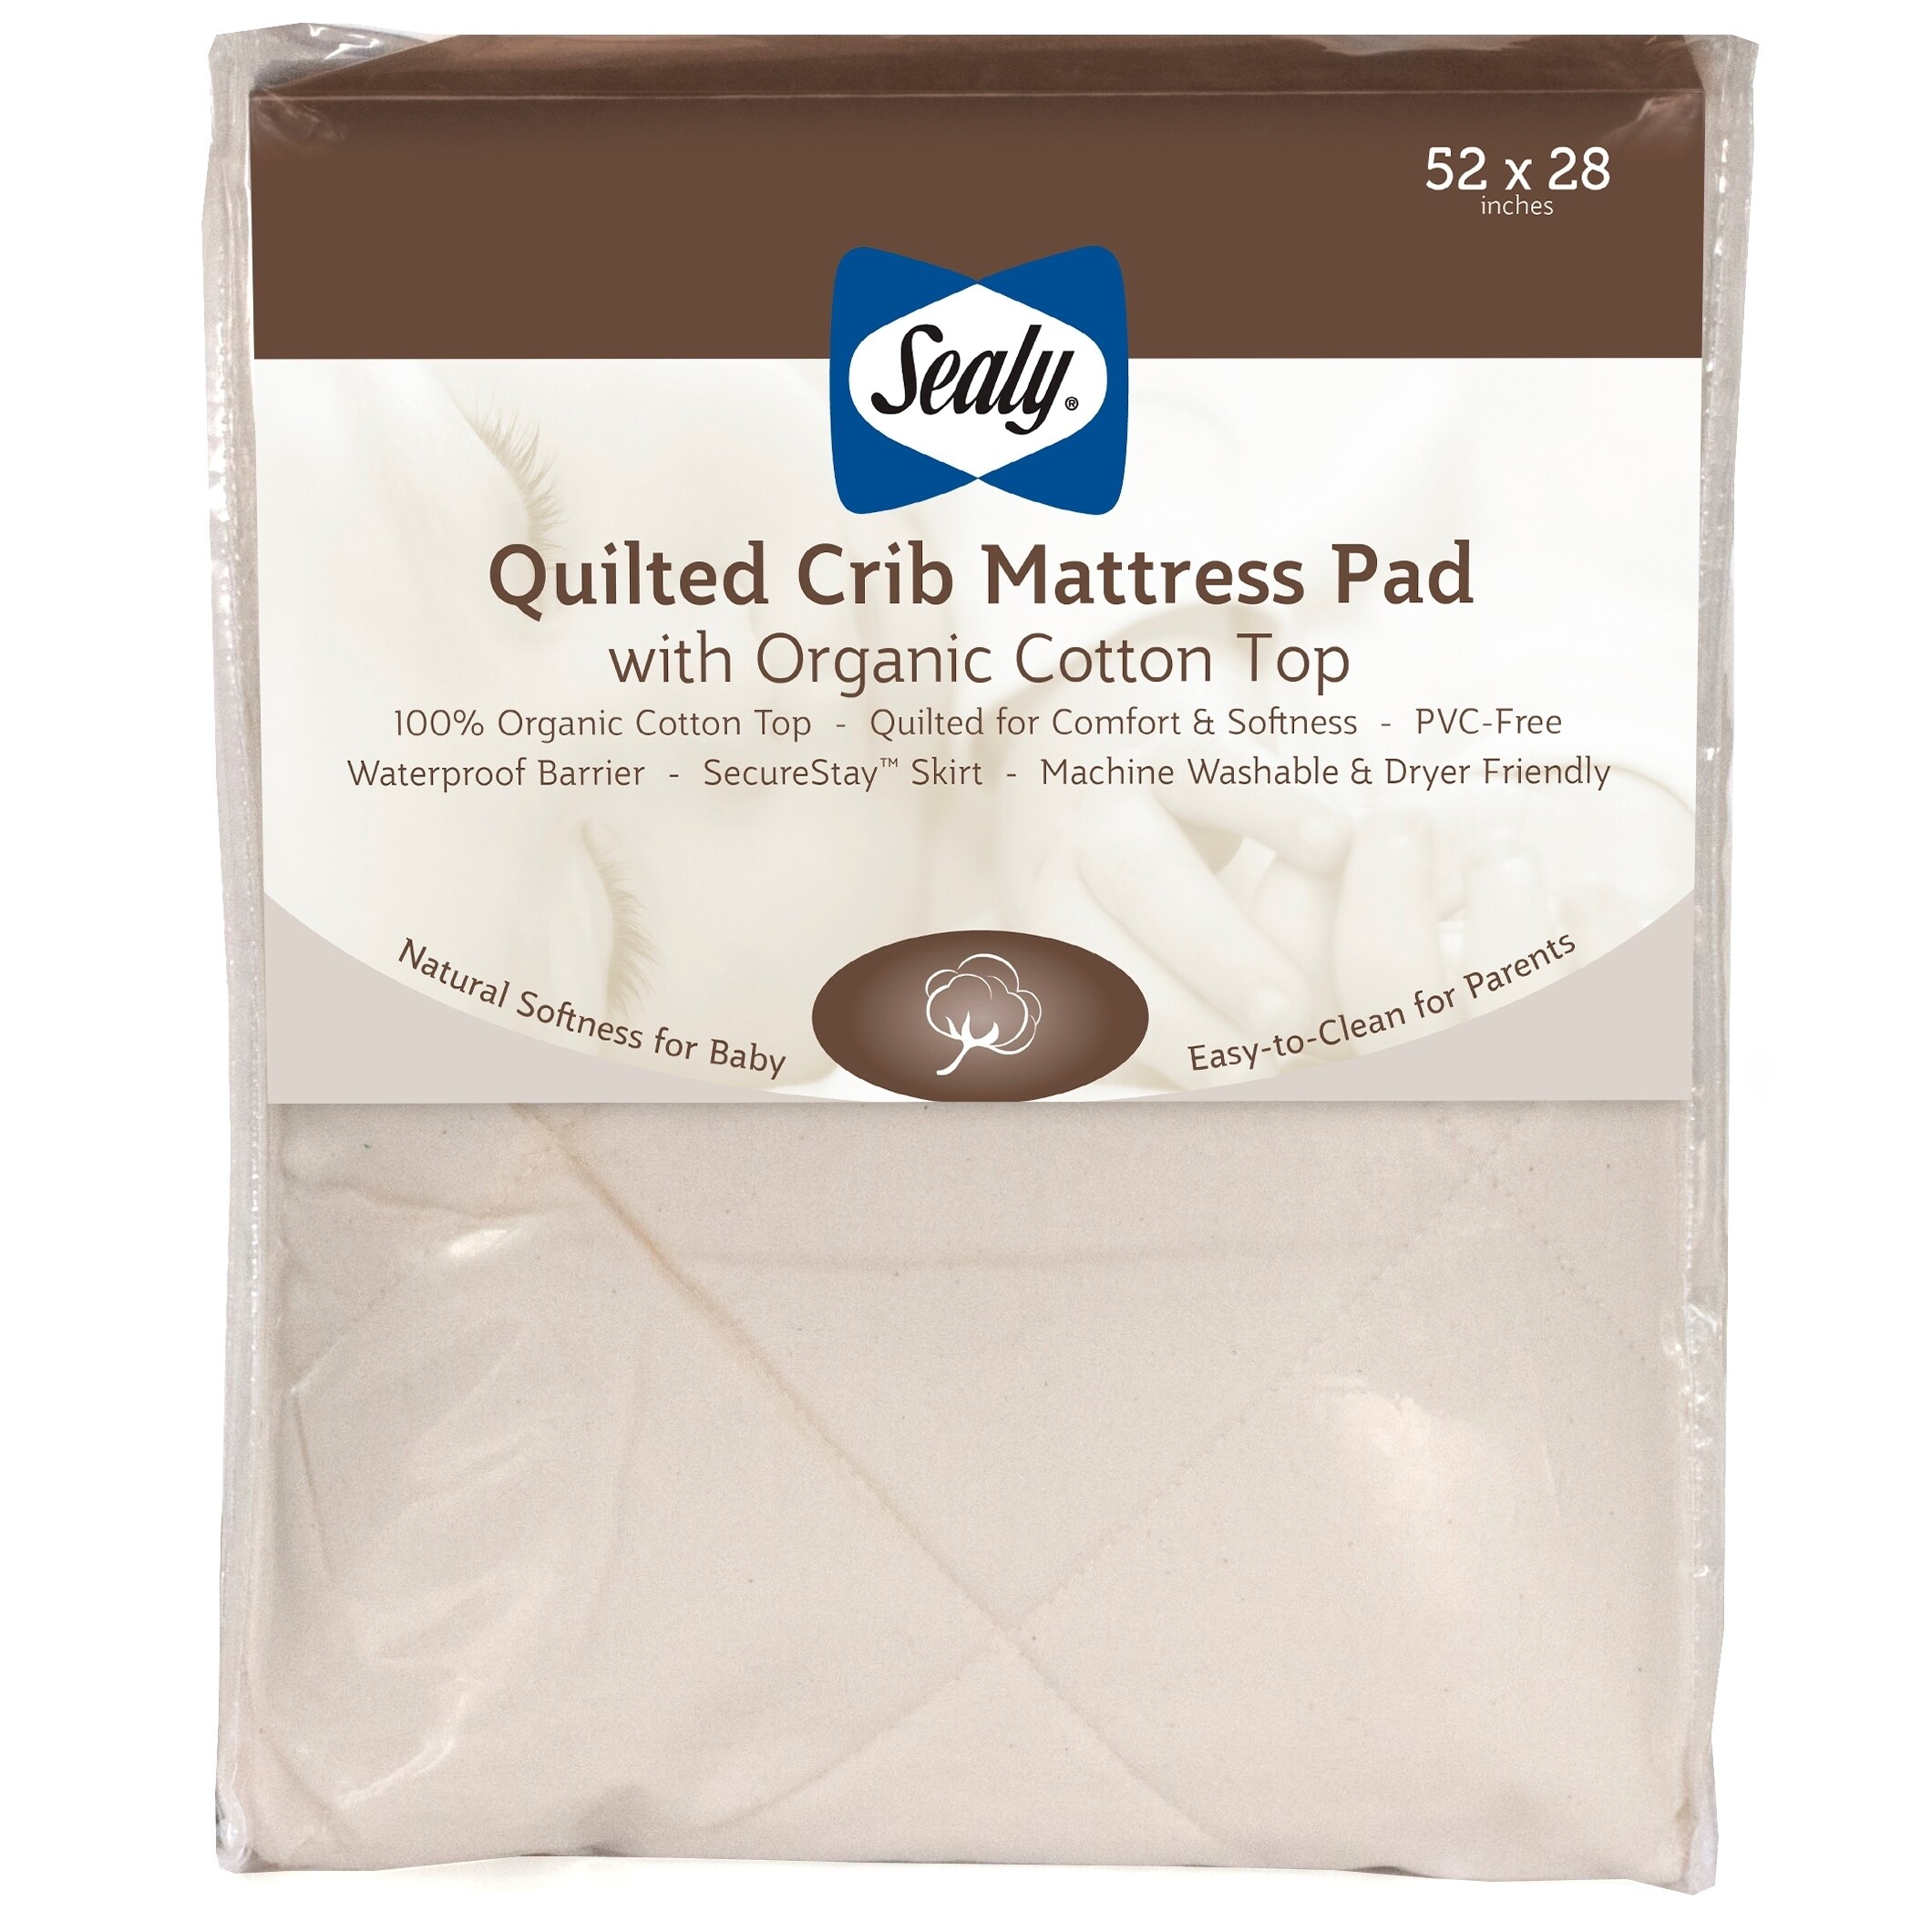 https://ak1.ostkcdn.com/images/products/16702064/Sealy-Quilted-Fitted-Crib-Mattress-Pad-with-Organic-Cotton-Top-and-Waterproof-Layer-Natural-d0d35e1a-58fc-44af-afc0-1c690e261385.jpg